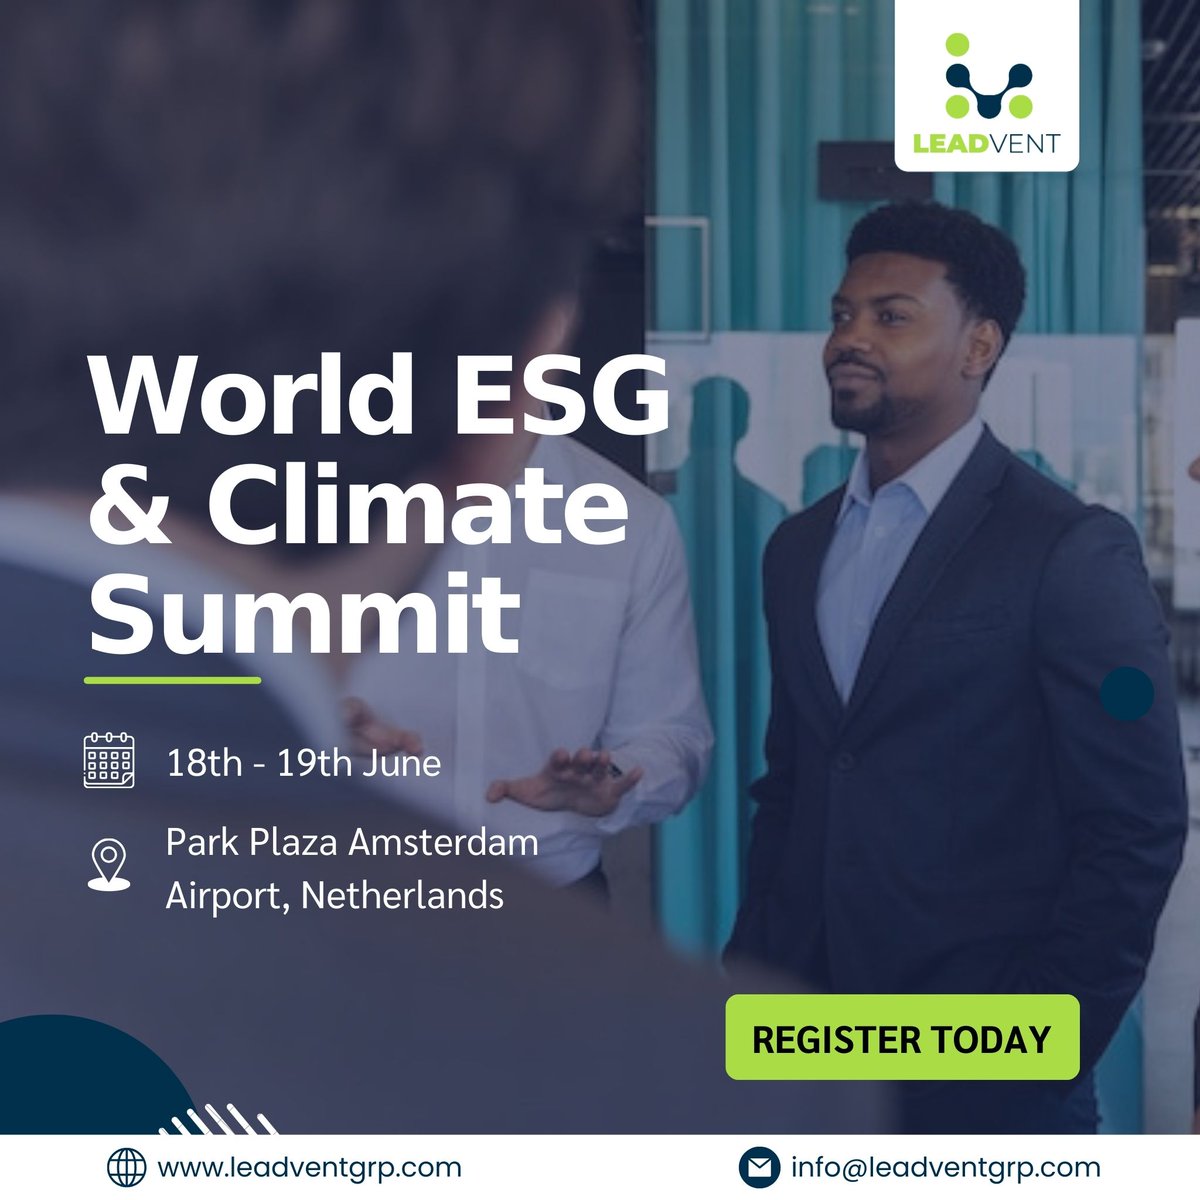 Hear from thought leaders, policymakers, and industry experts on the latest developments in ESG investing, sustainable finance, and climate resilience.

Obtain a pass - bit.ly/3QaaYU7

#sustainability #ESGconcerns #netzero #Renewableenergy #Greenfinance #Greenpolicies